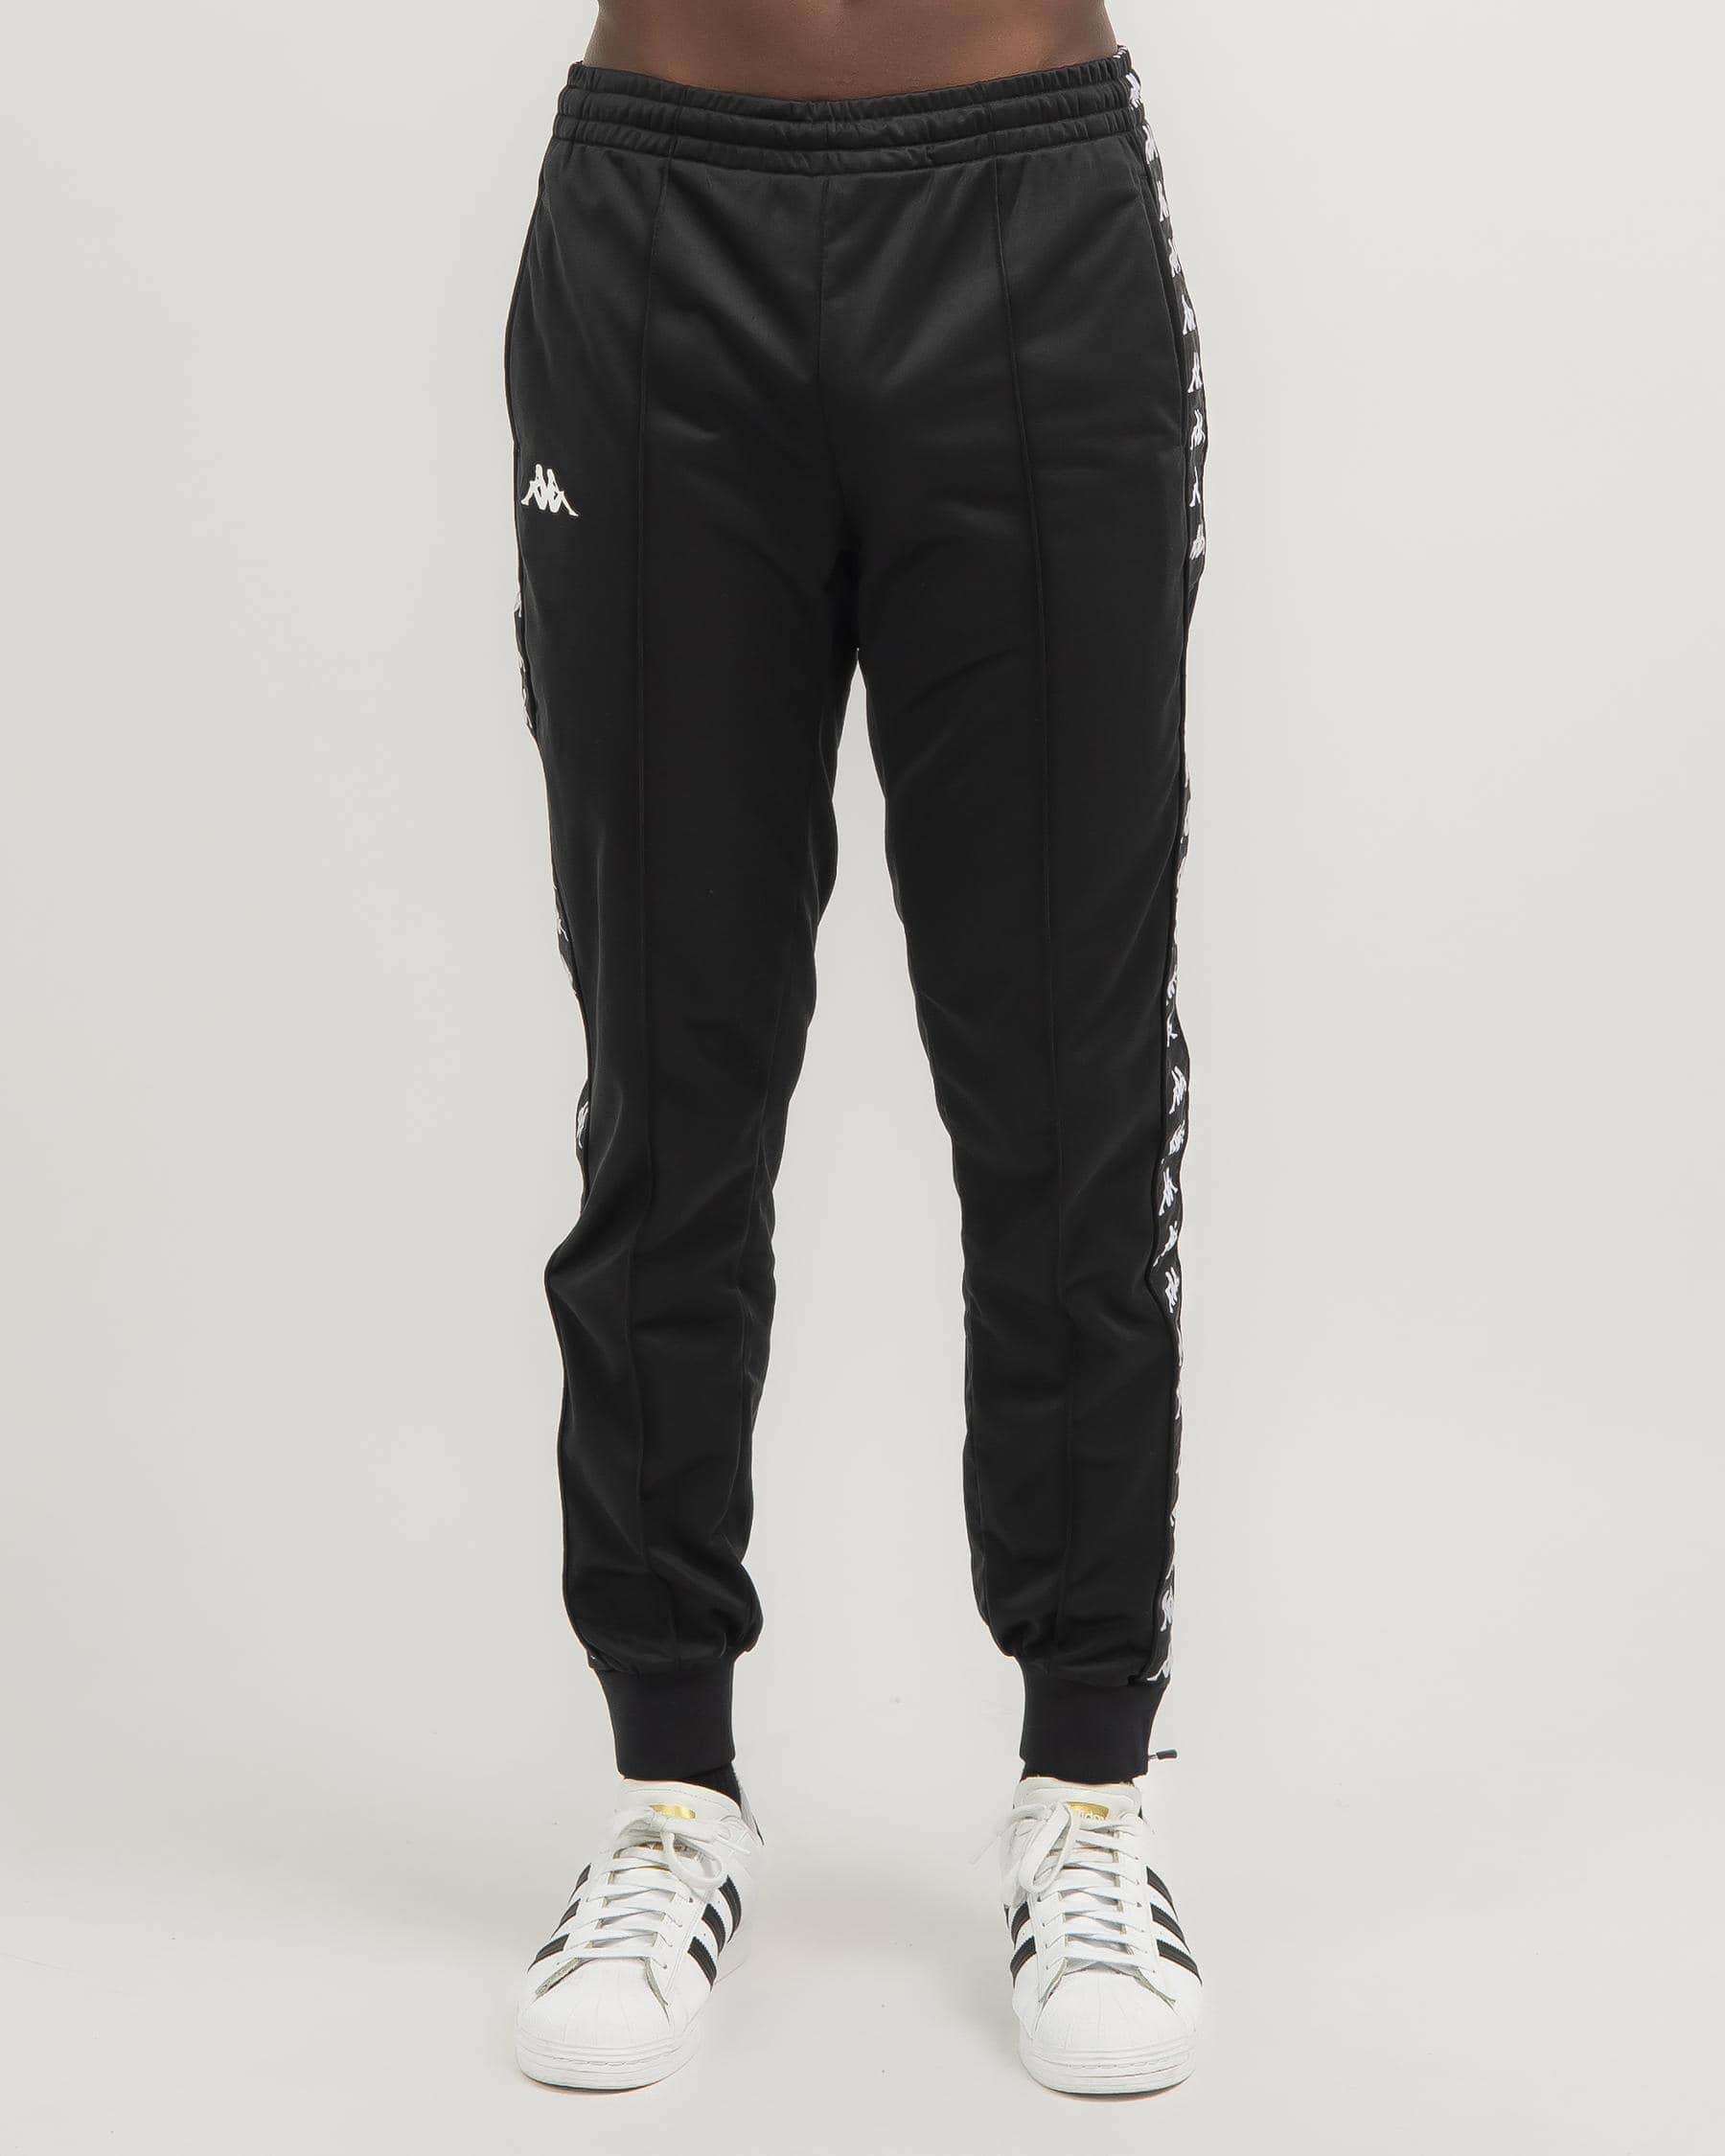 Kappa Tearaway Track Pant | Urban Outfitters